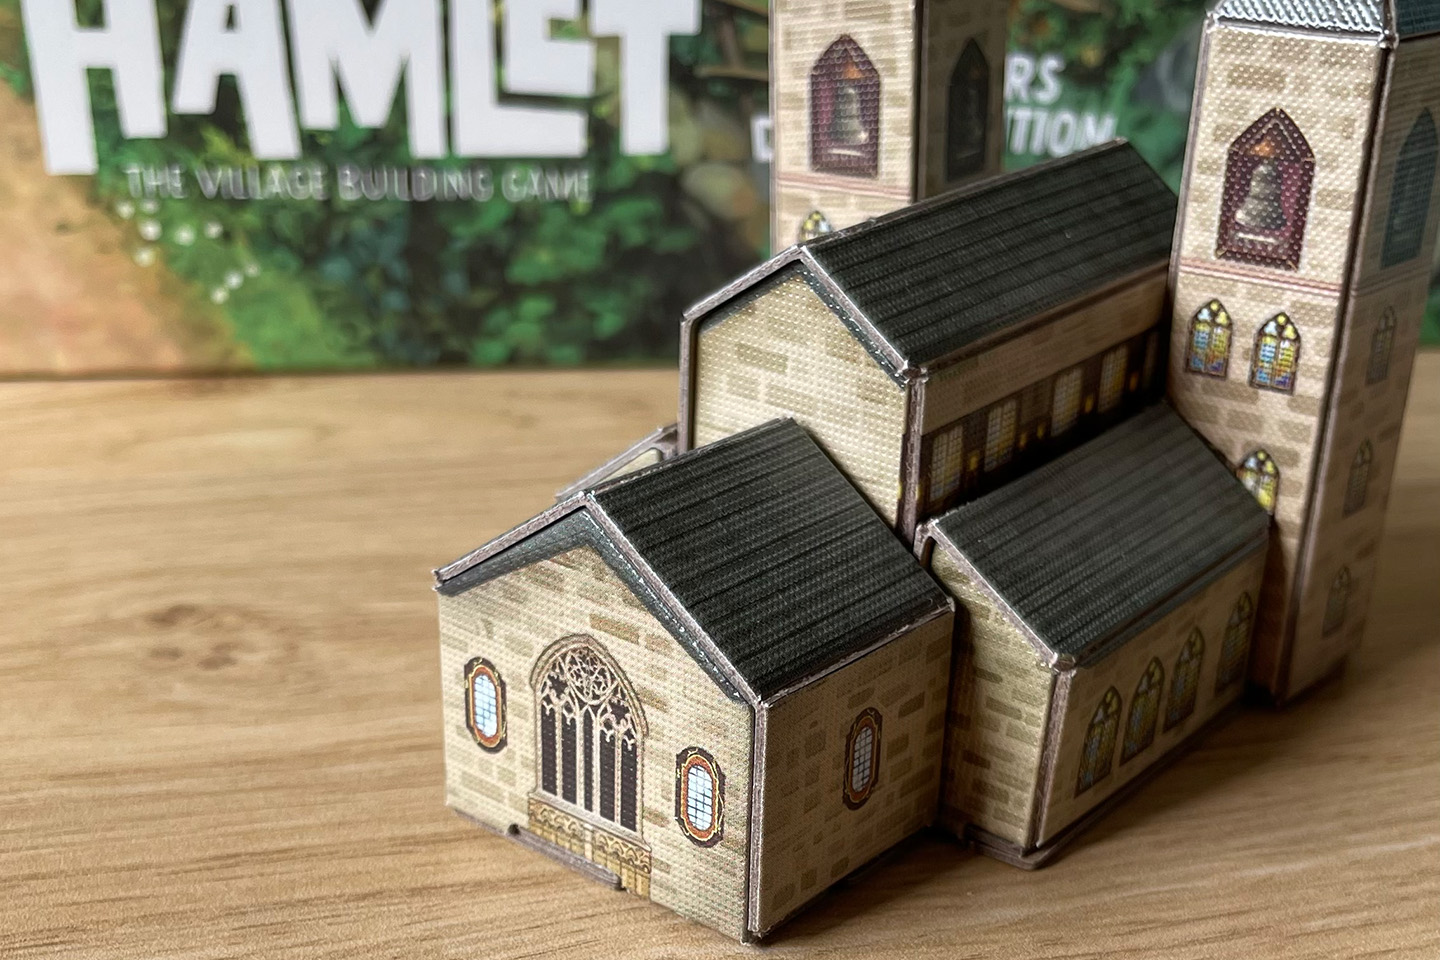 This 3D church that came with the deluxe edition isn't deluxe at all.